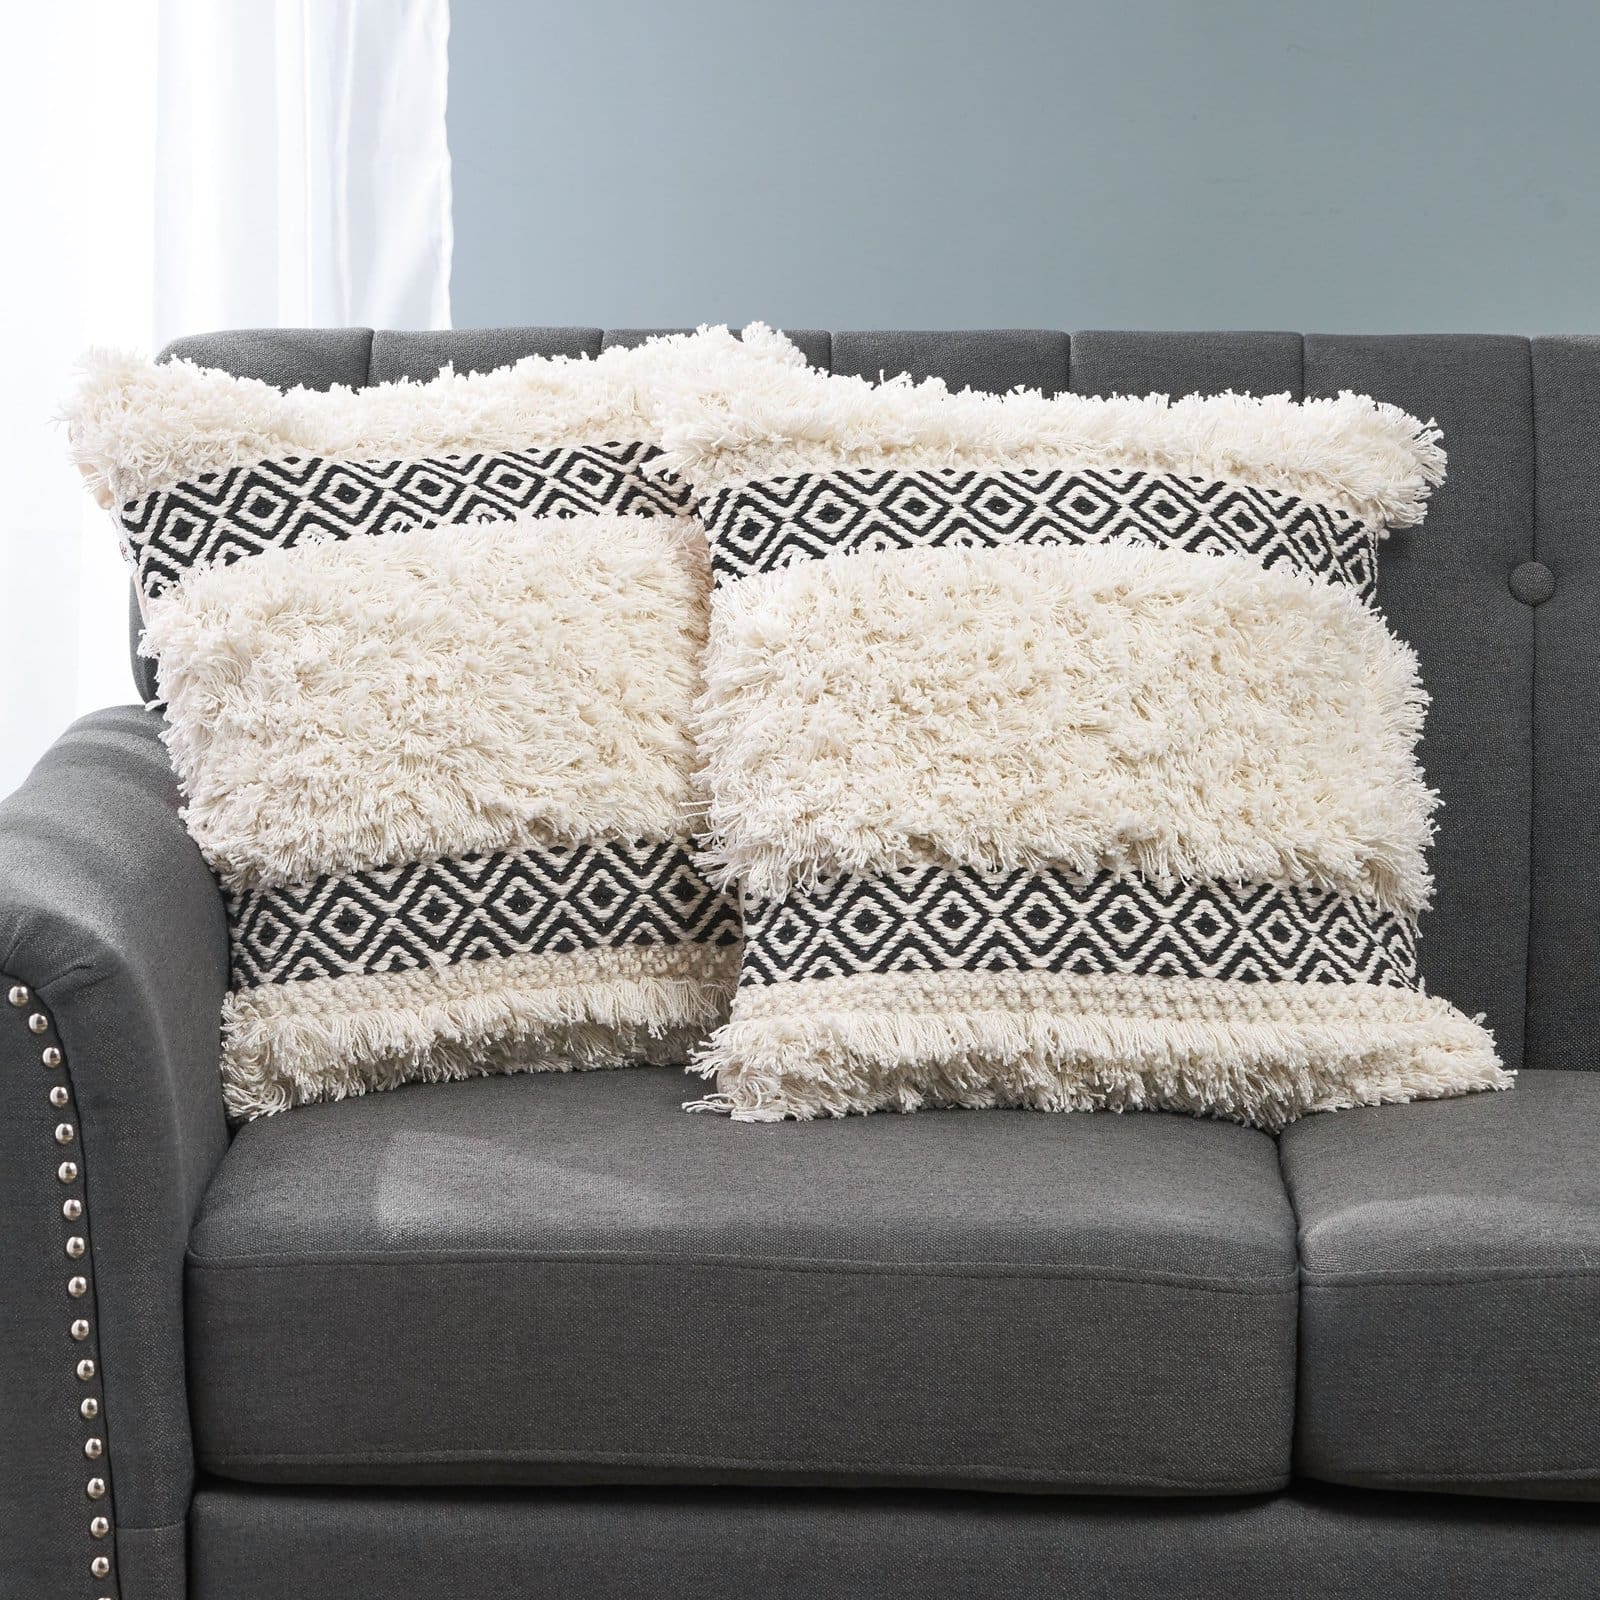 Combine Boho Pillows with a Black Couch